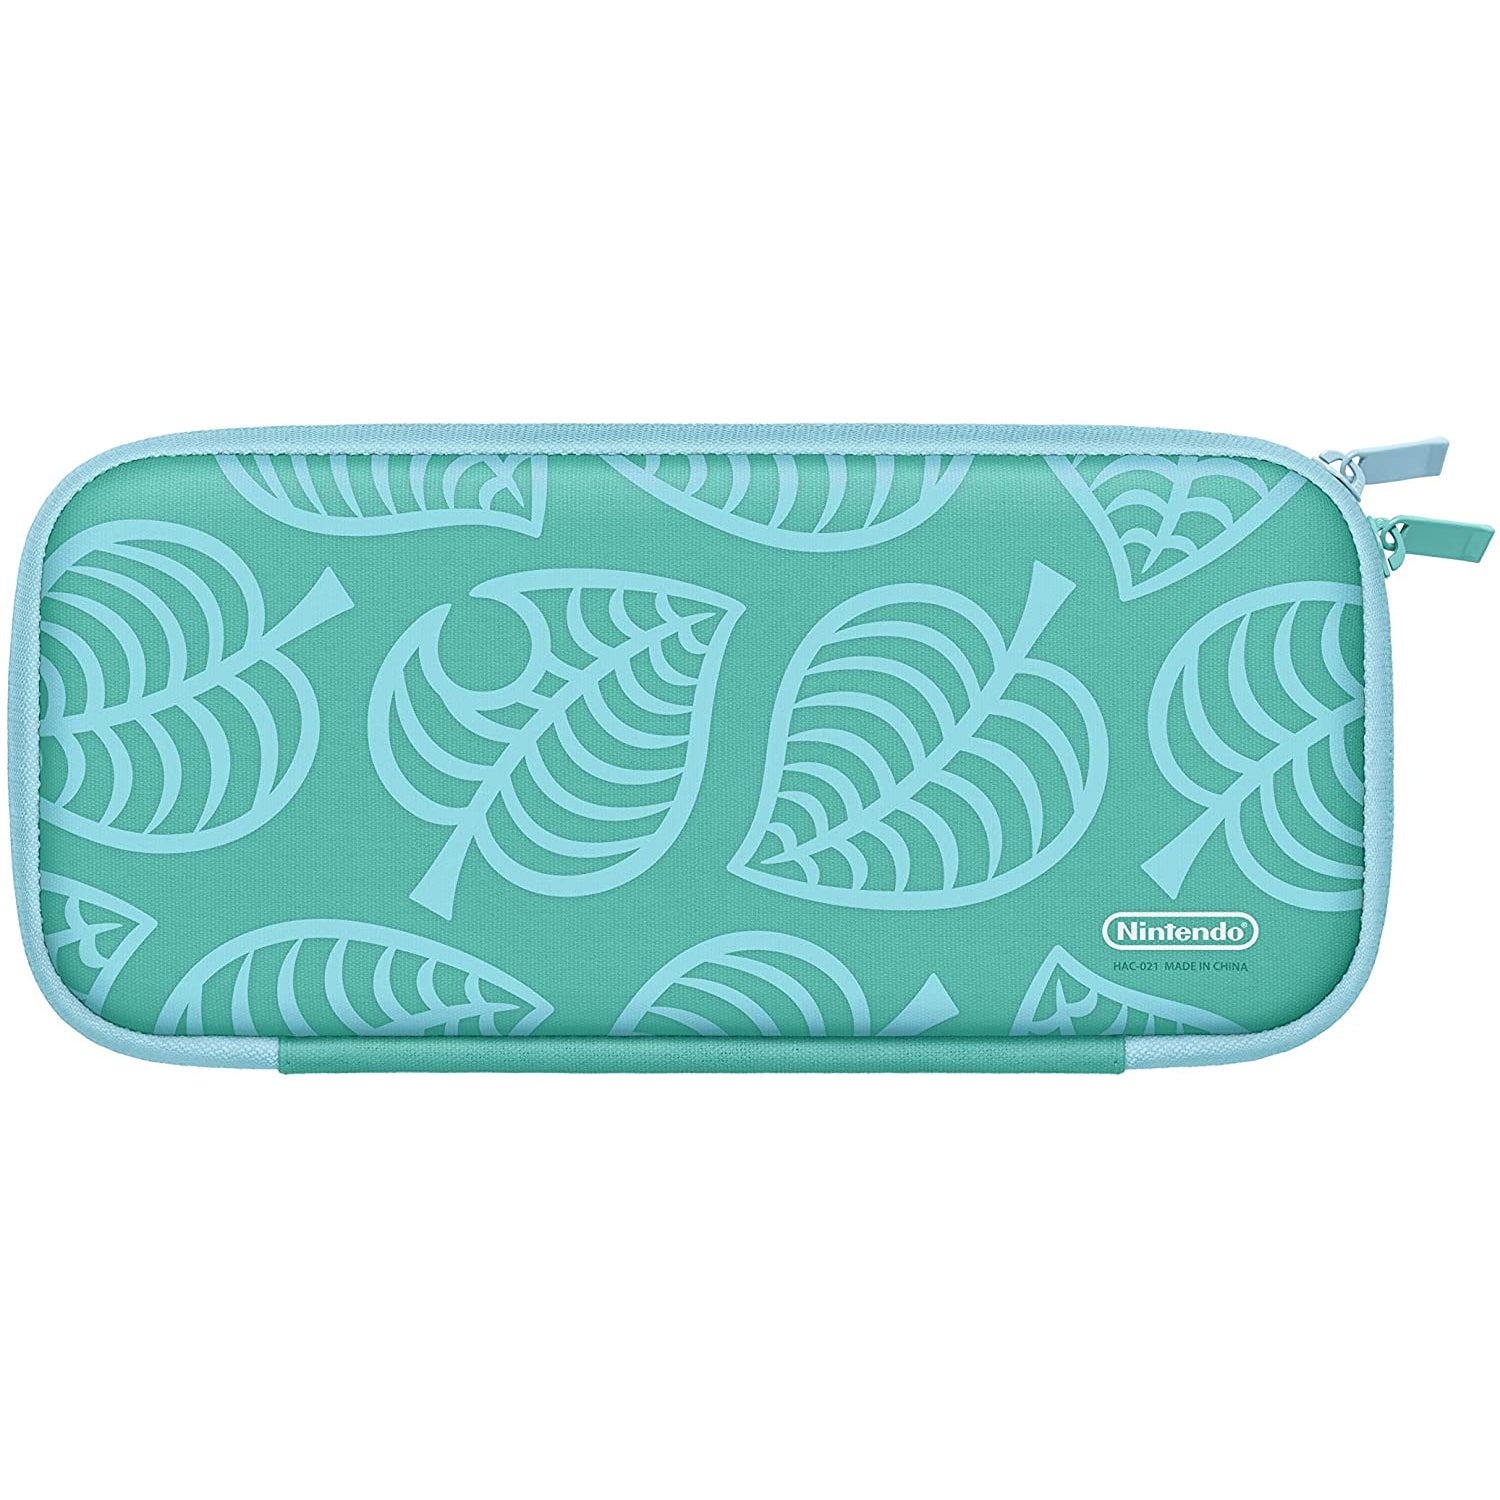 Nintendo Switch Carrying Case (Animal Crossing: New Horizons Edition)